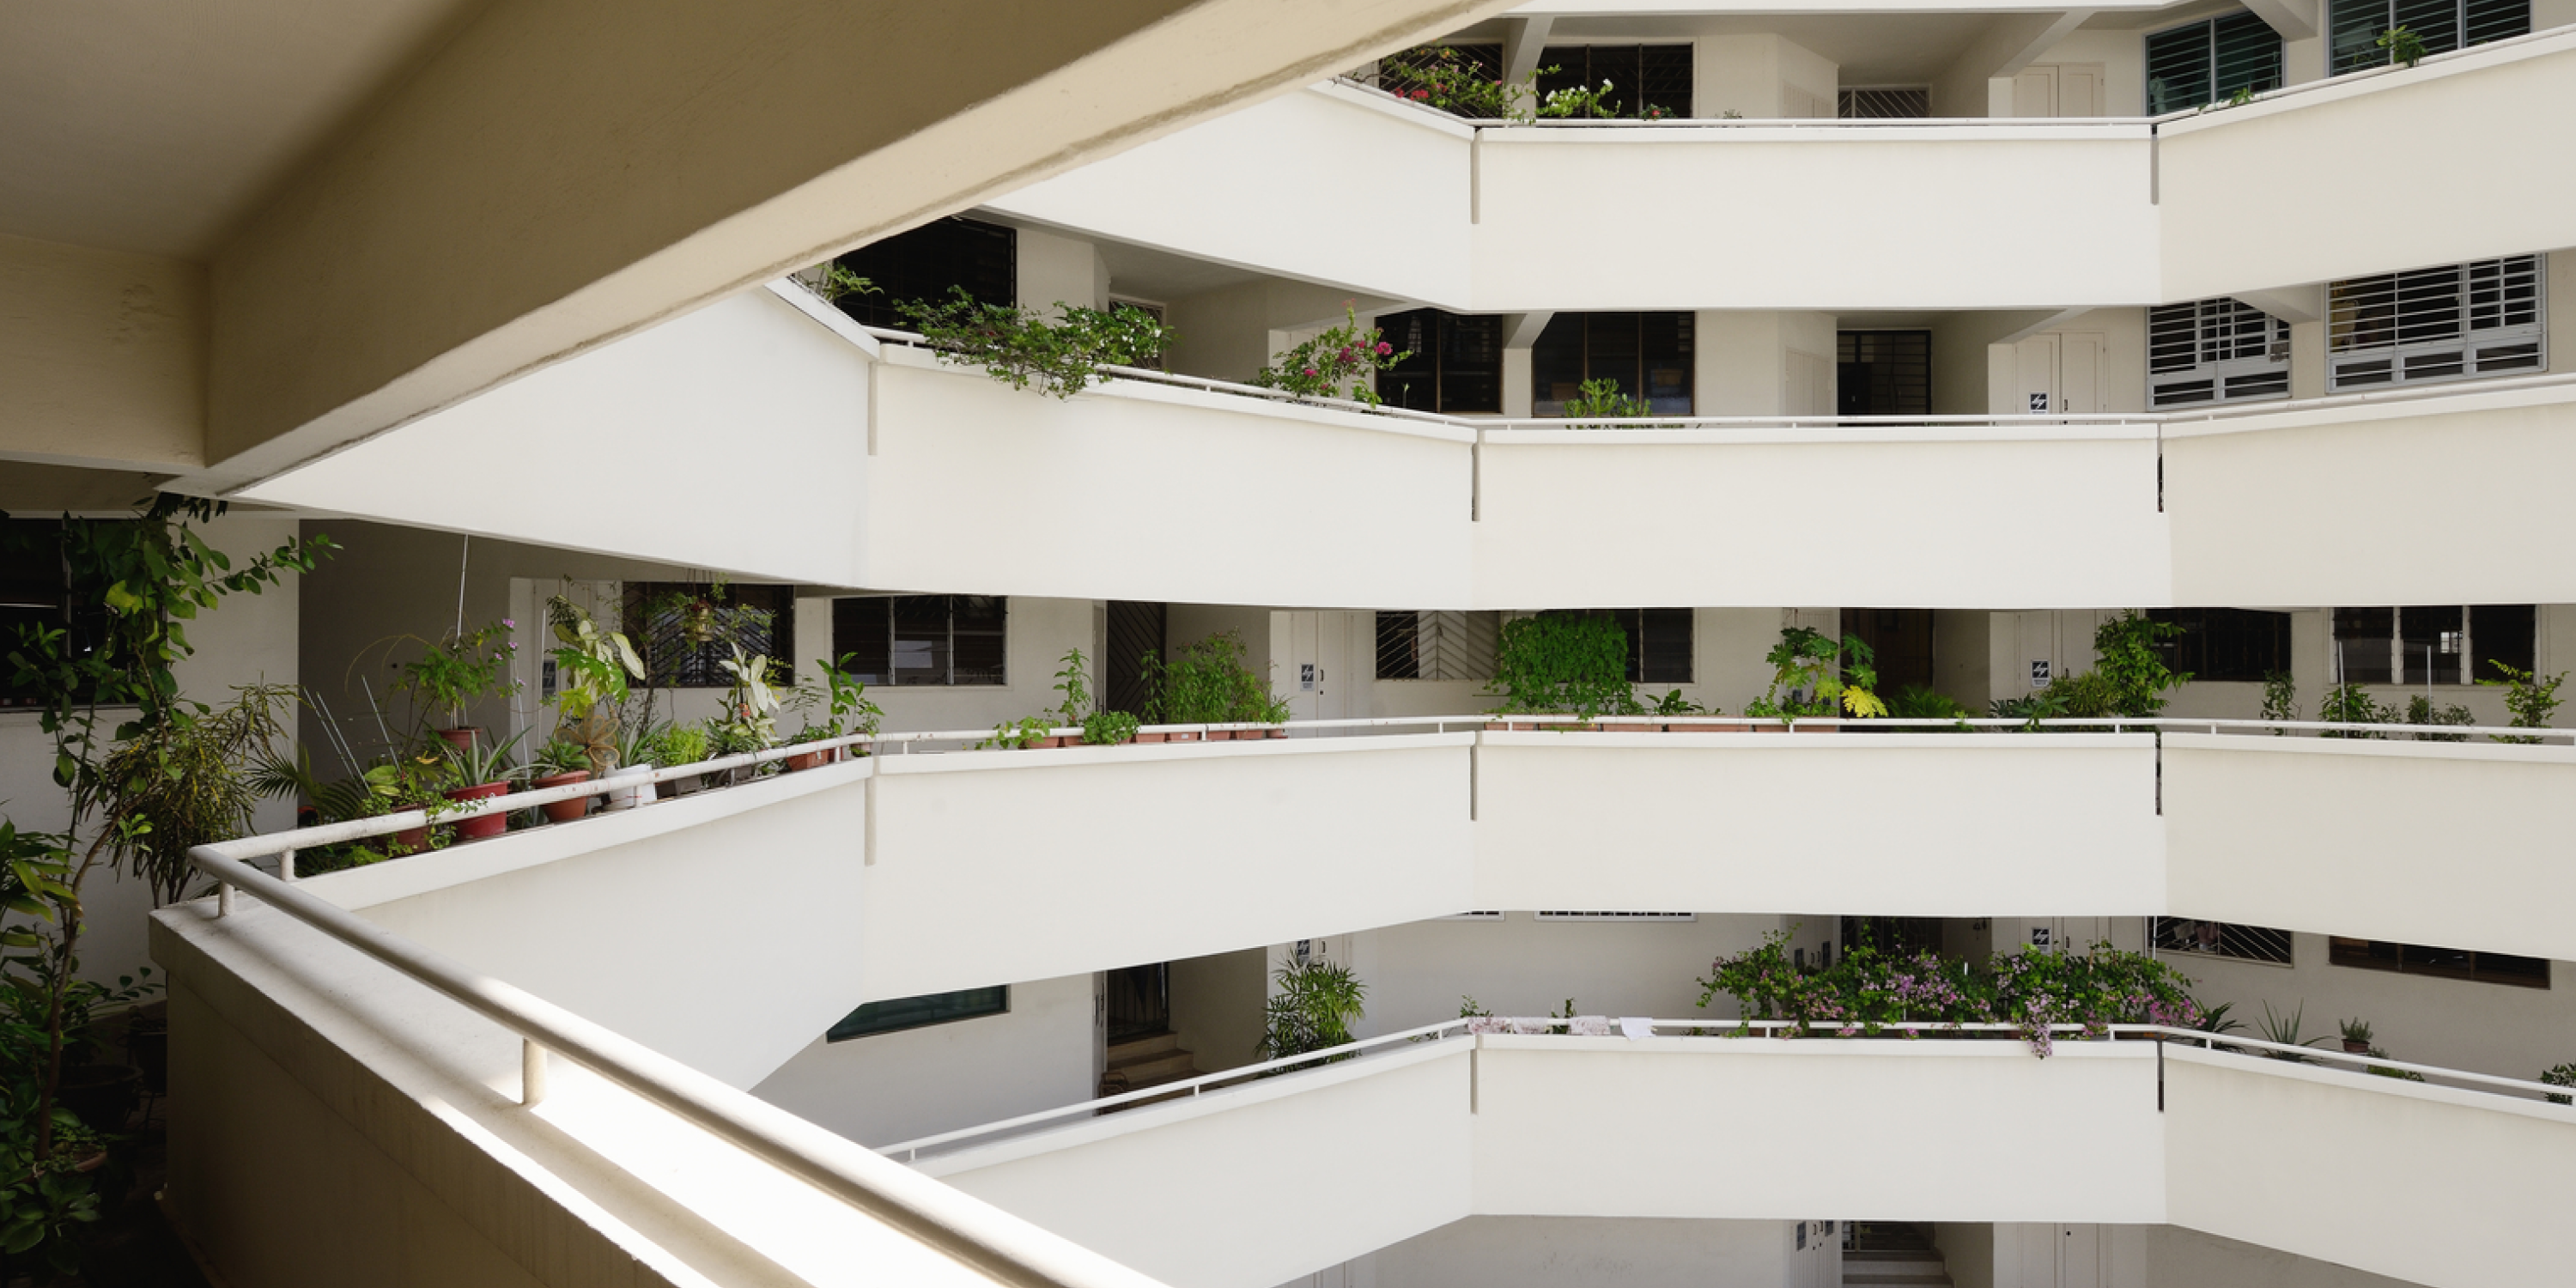 An image of an apartment building foyer where you can see green plants on the apartment balconies above